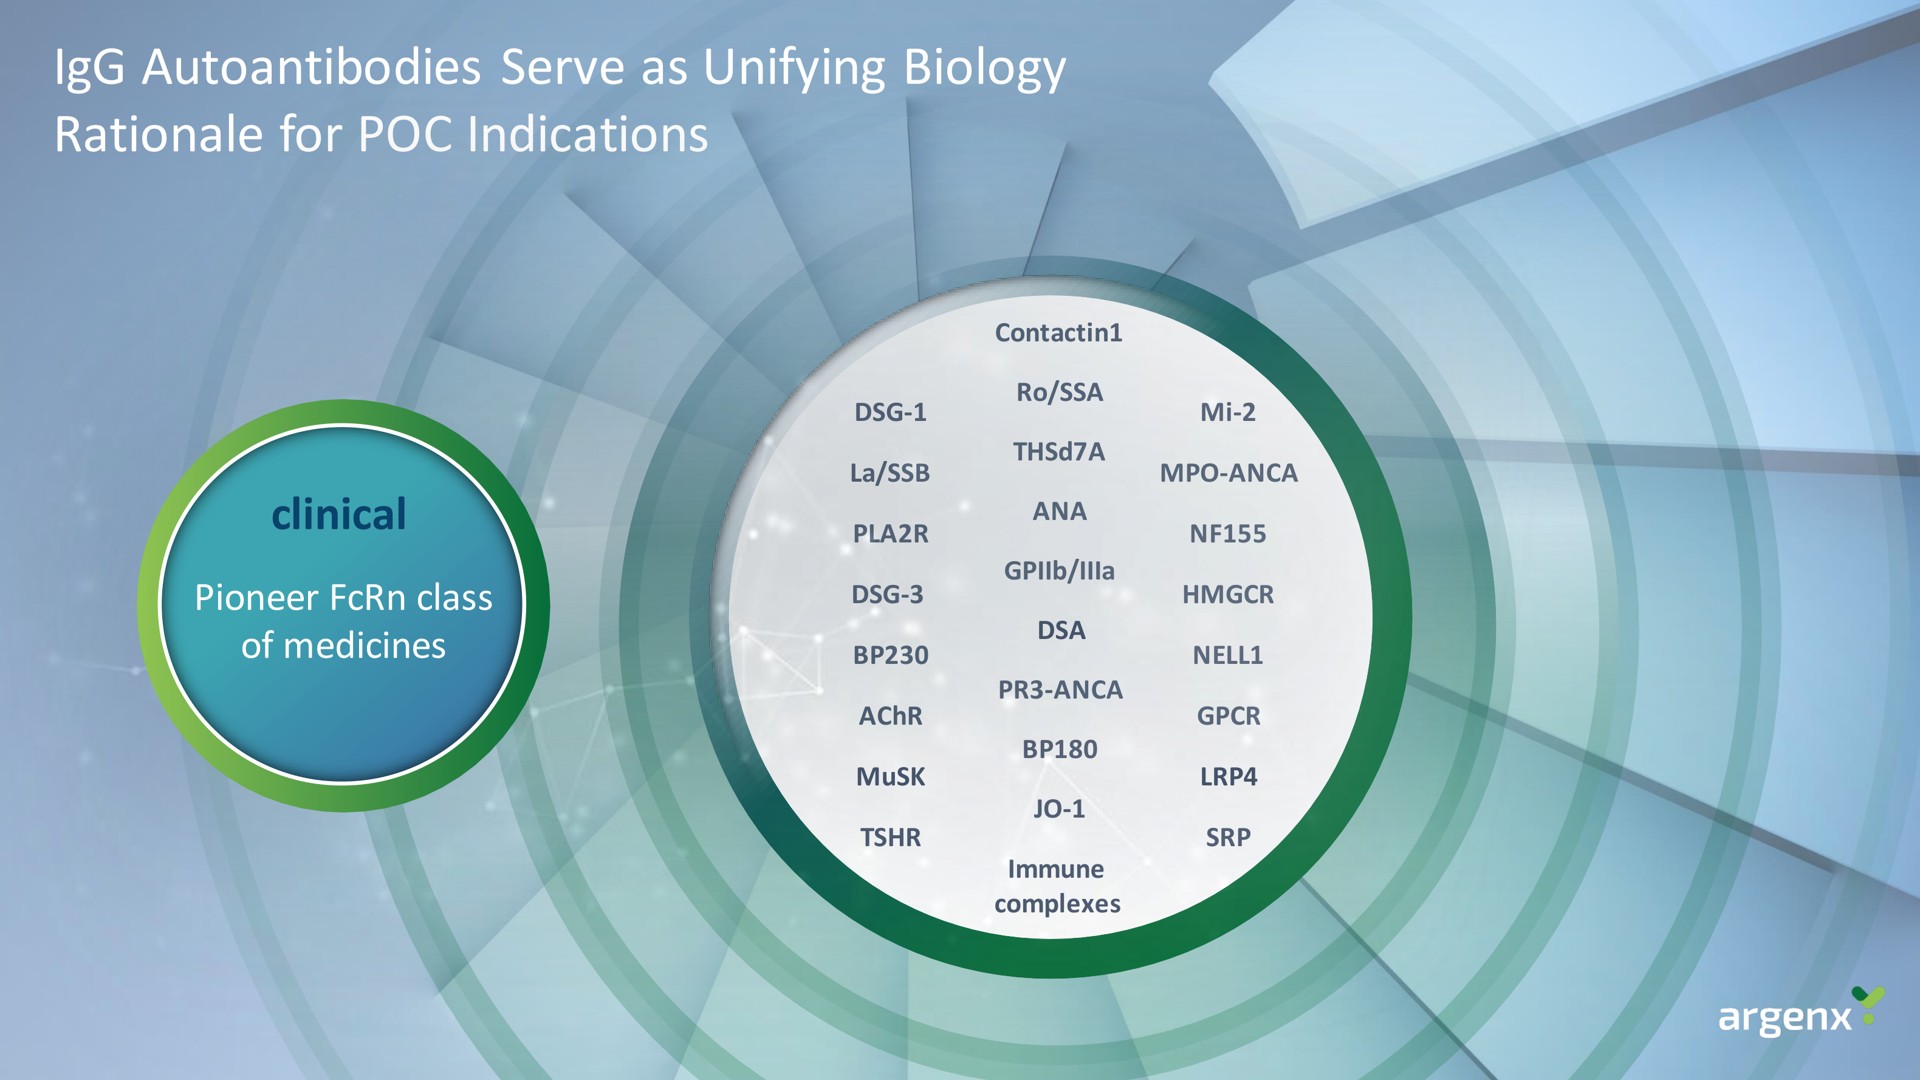 autoantibodies serve as unifying biology rationale for indications | argenx SE